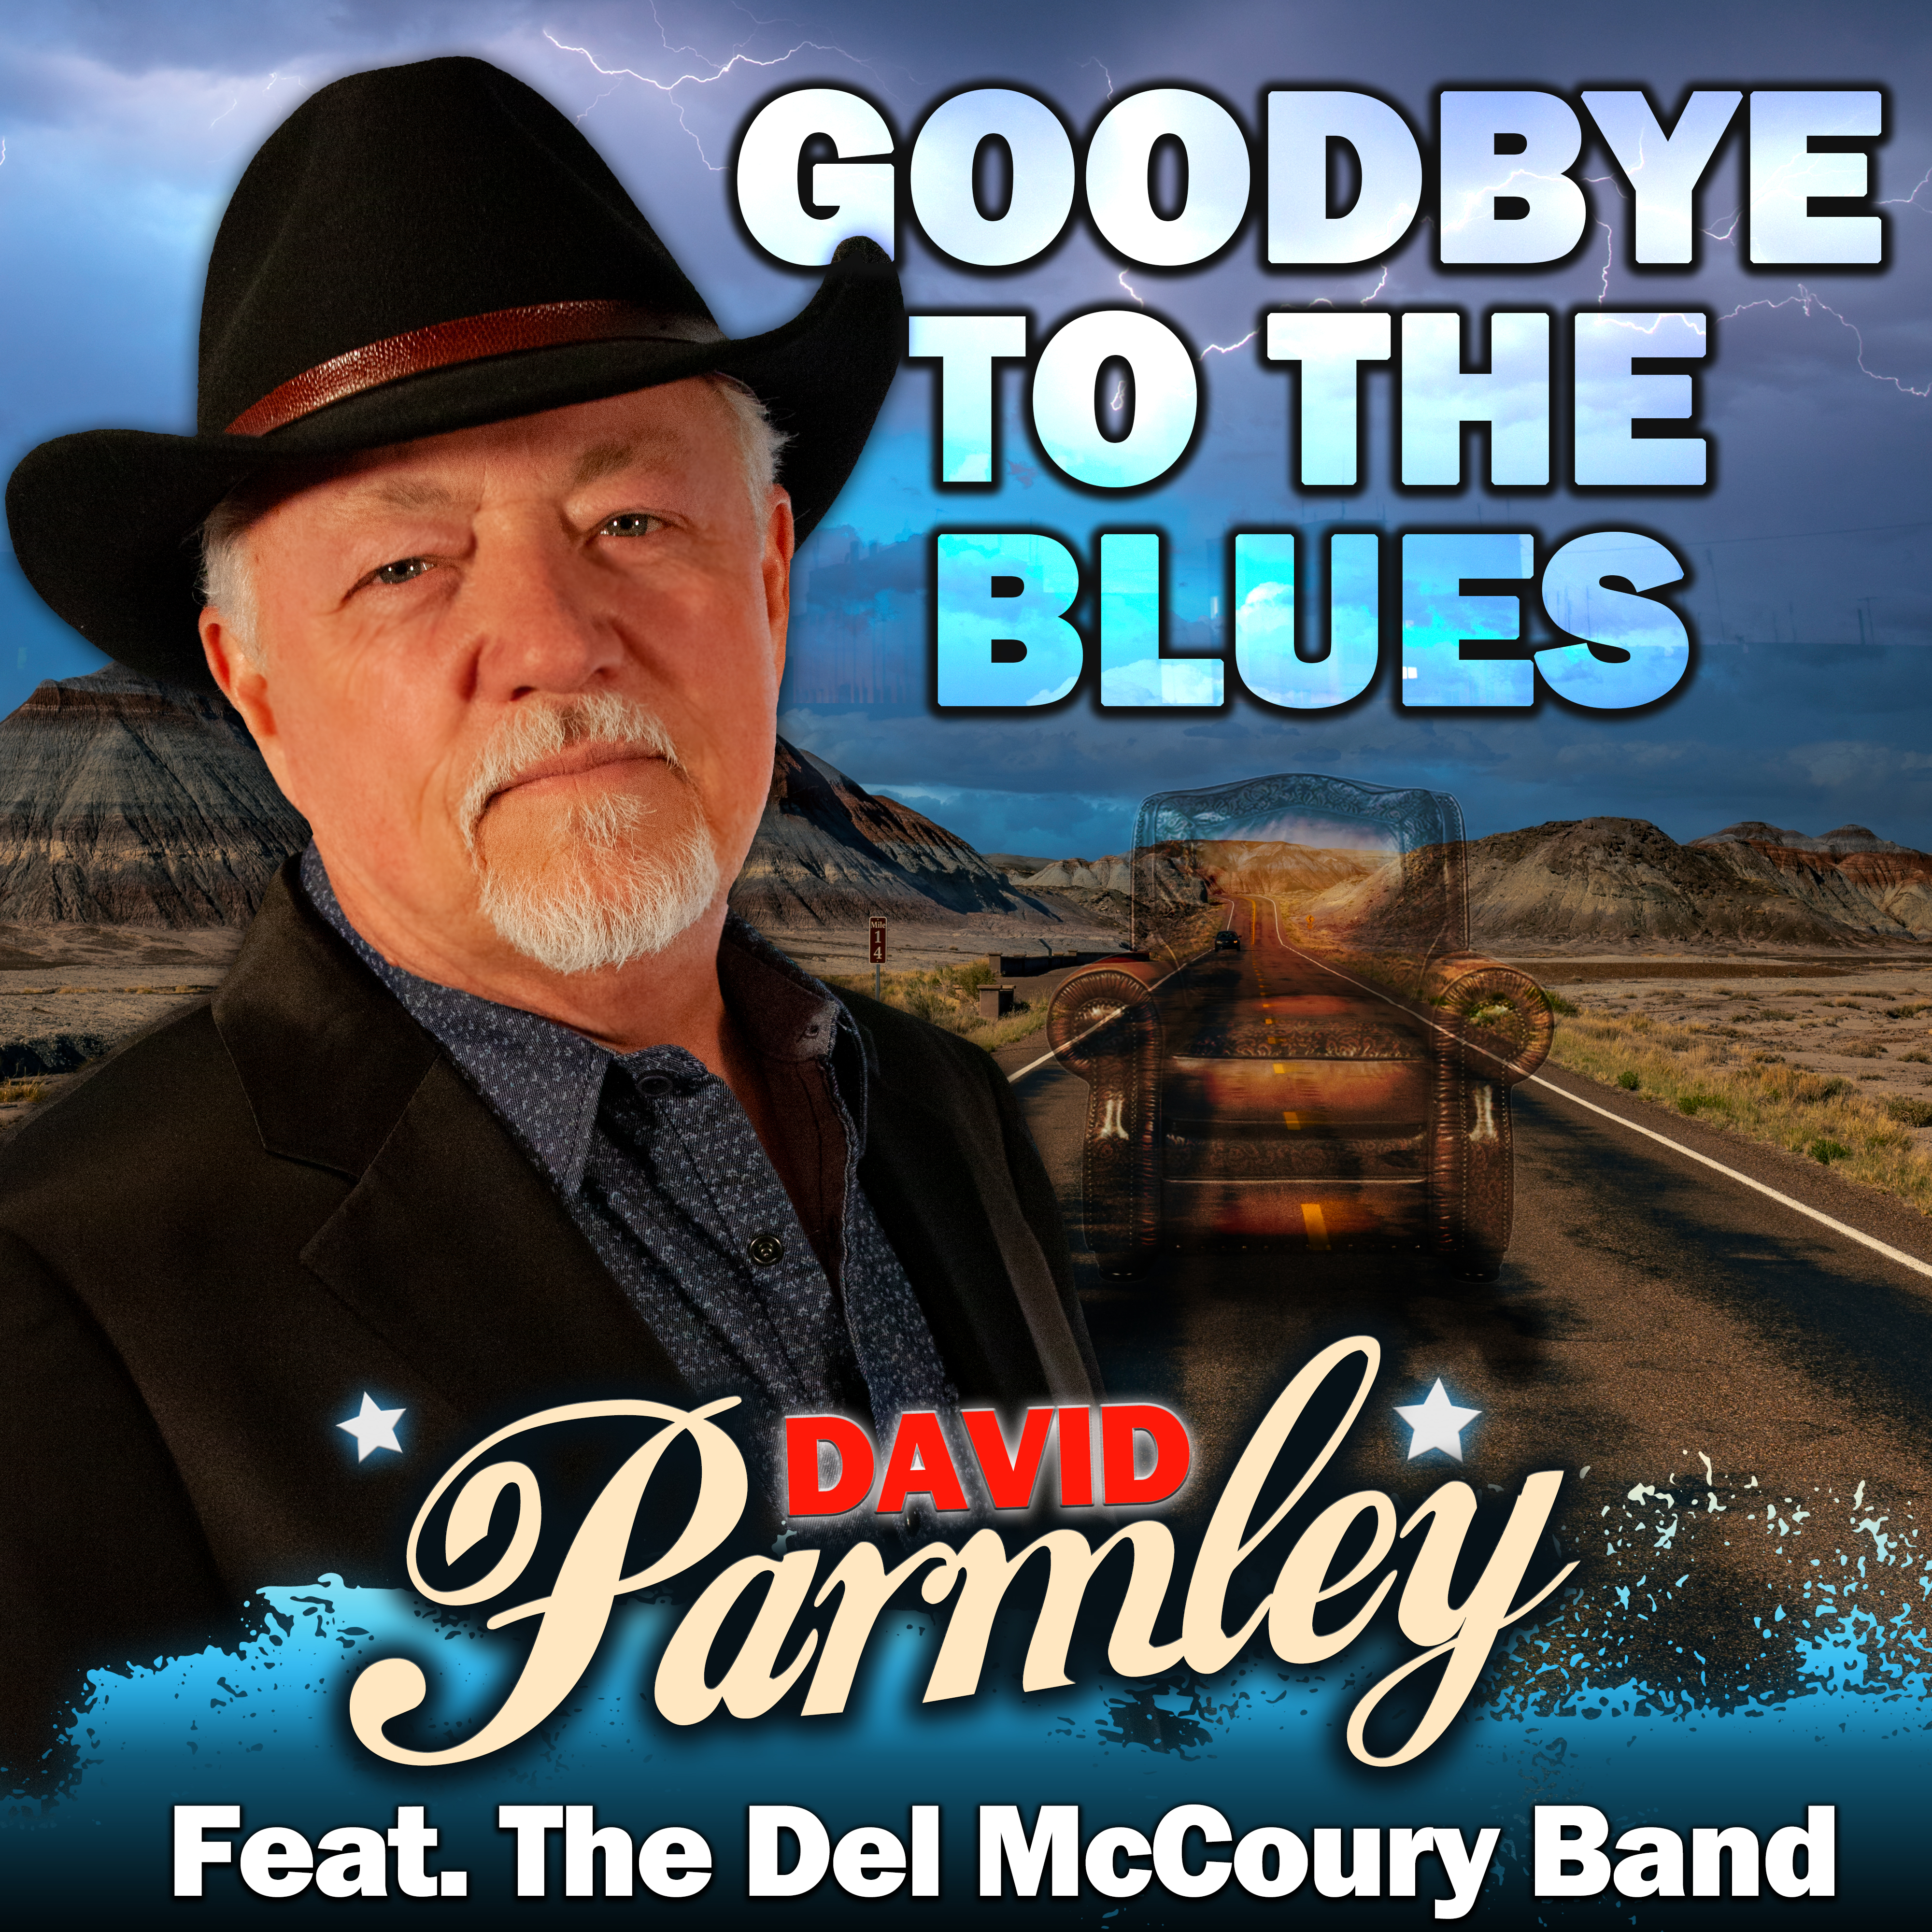 Art for GoodBye To The Blues by David Parmley